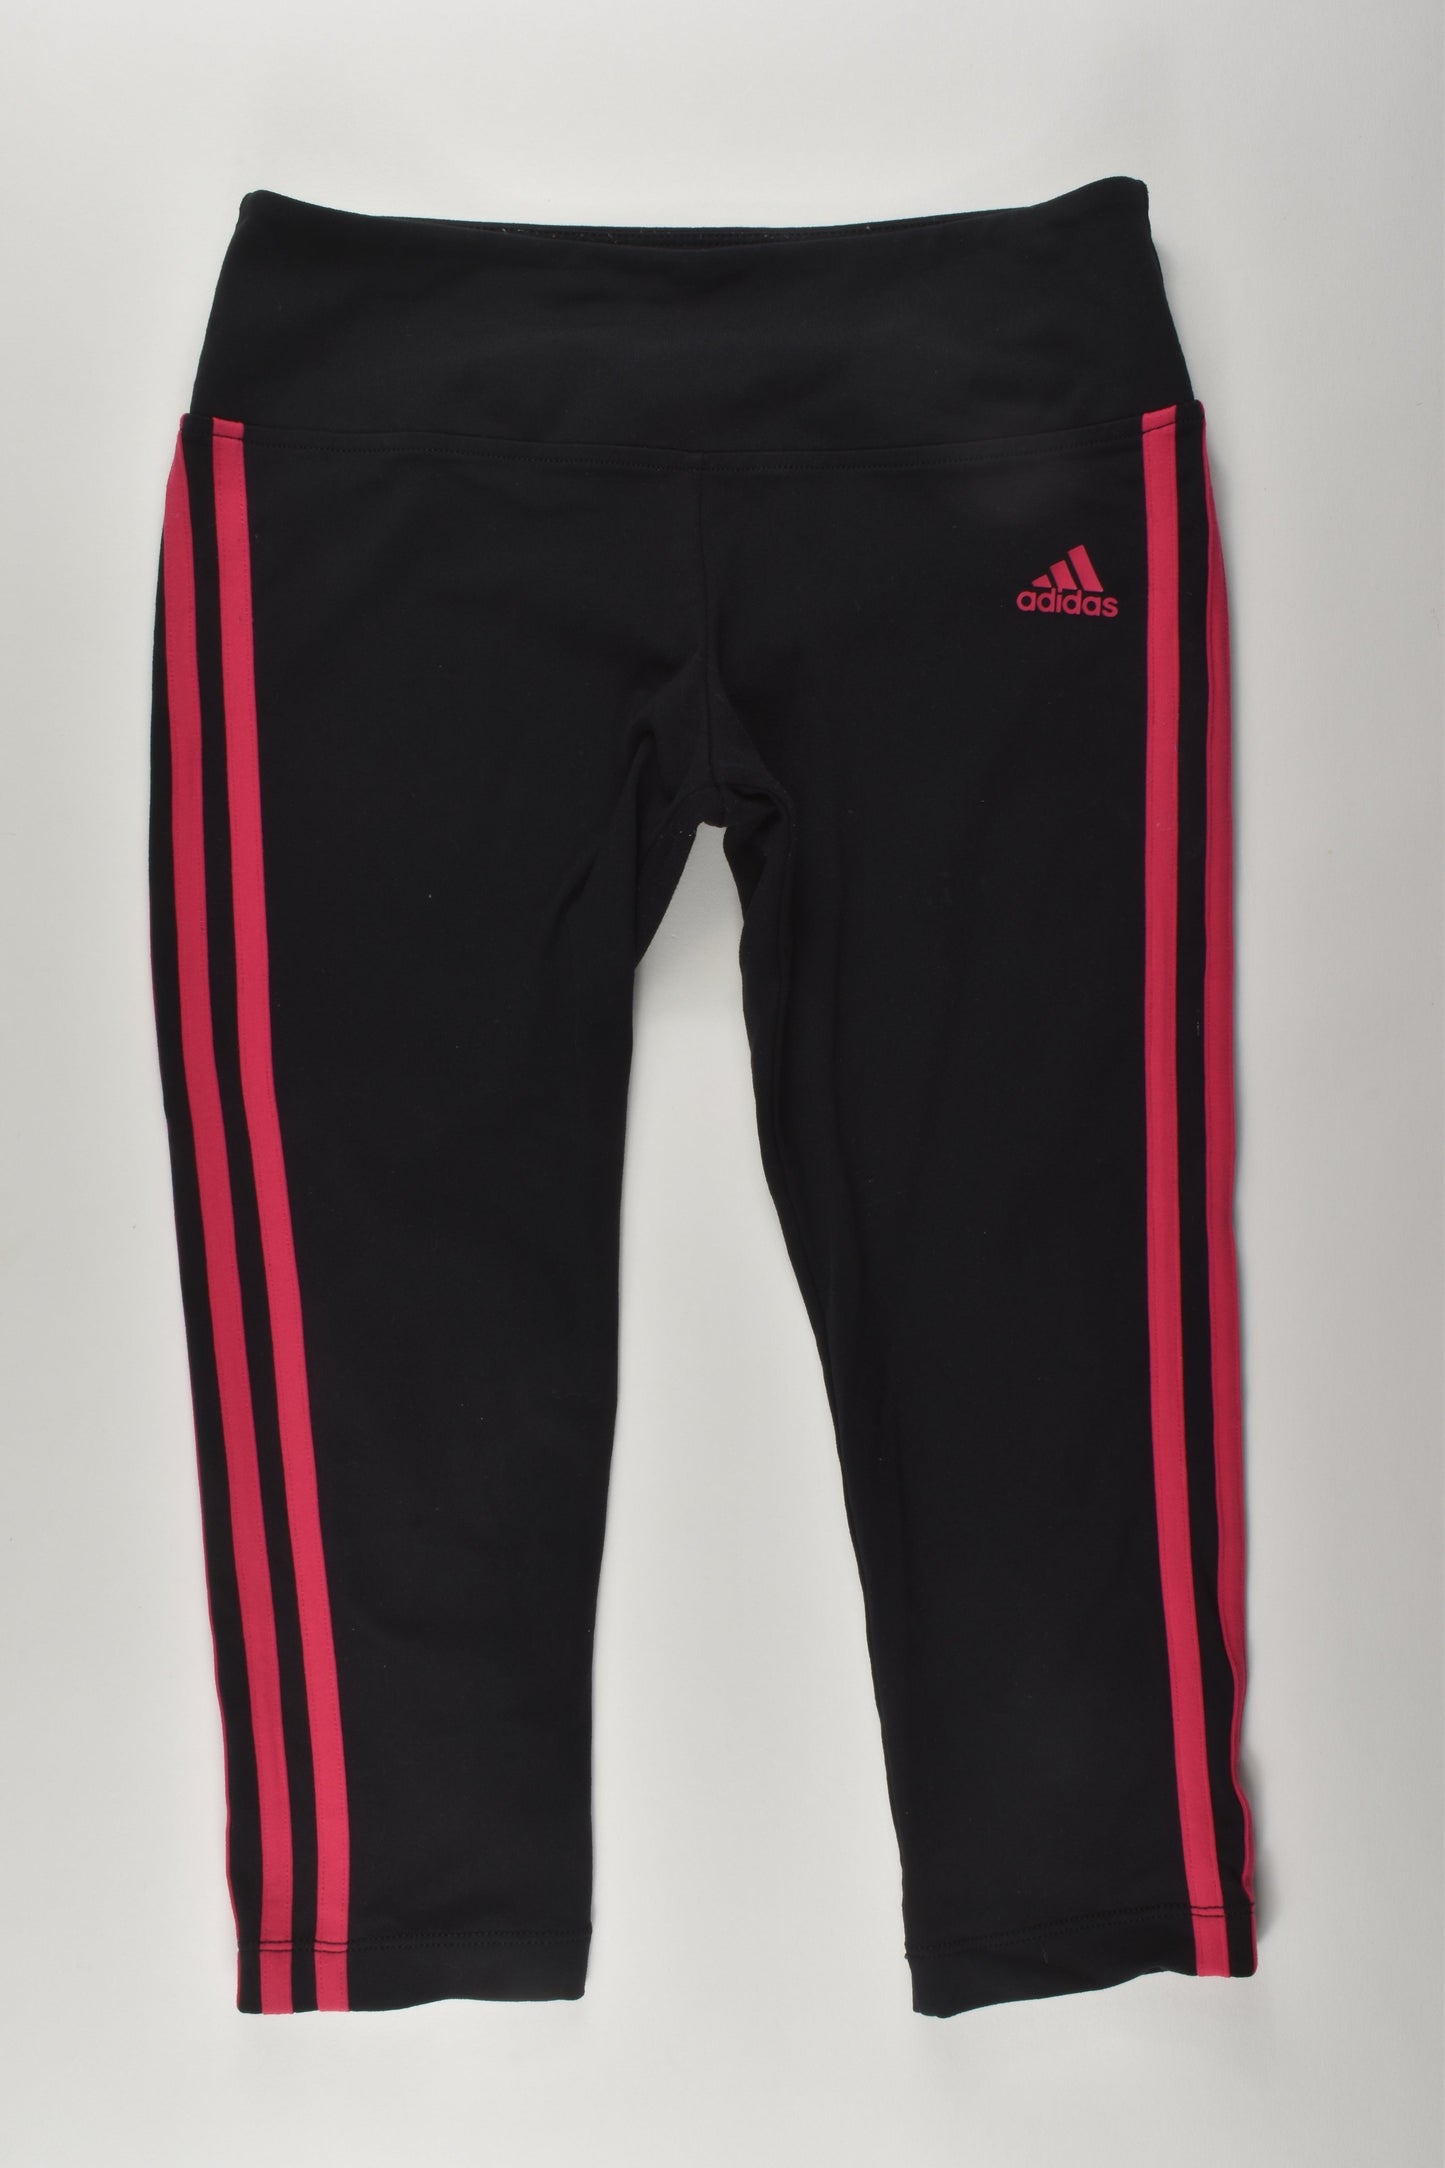 Adidas Size approx 14 Sport Pants